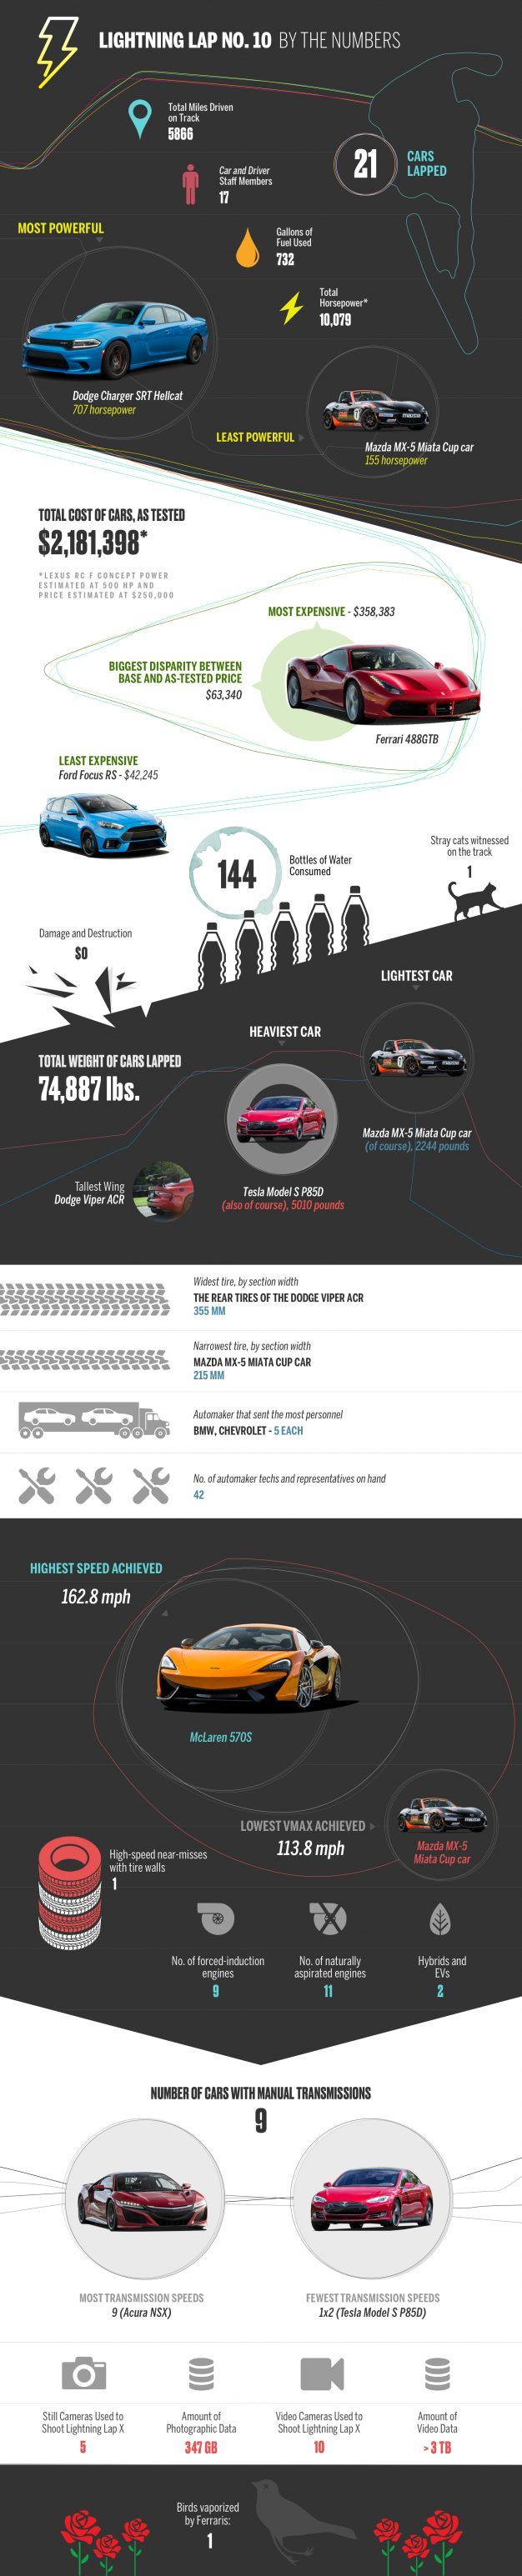 Lightning Lap 10 By the Numbers Infographic